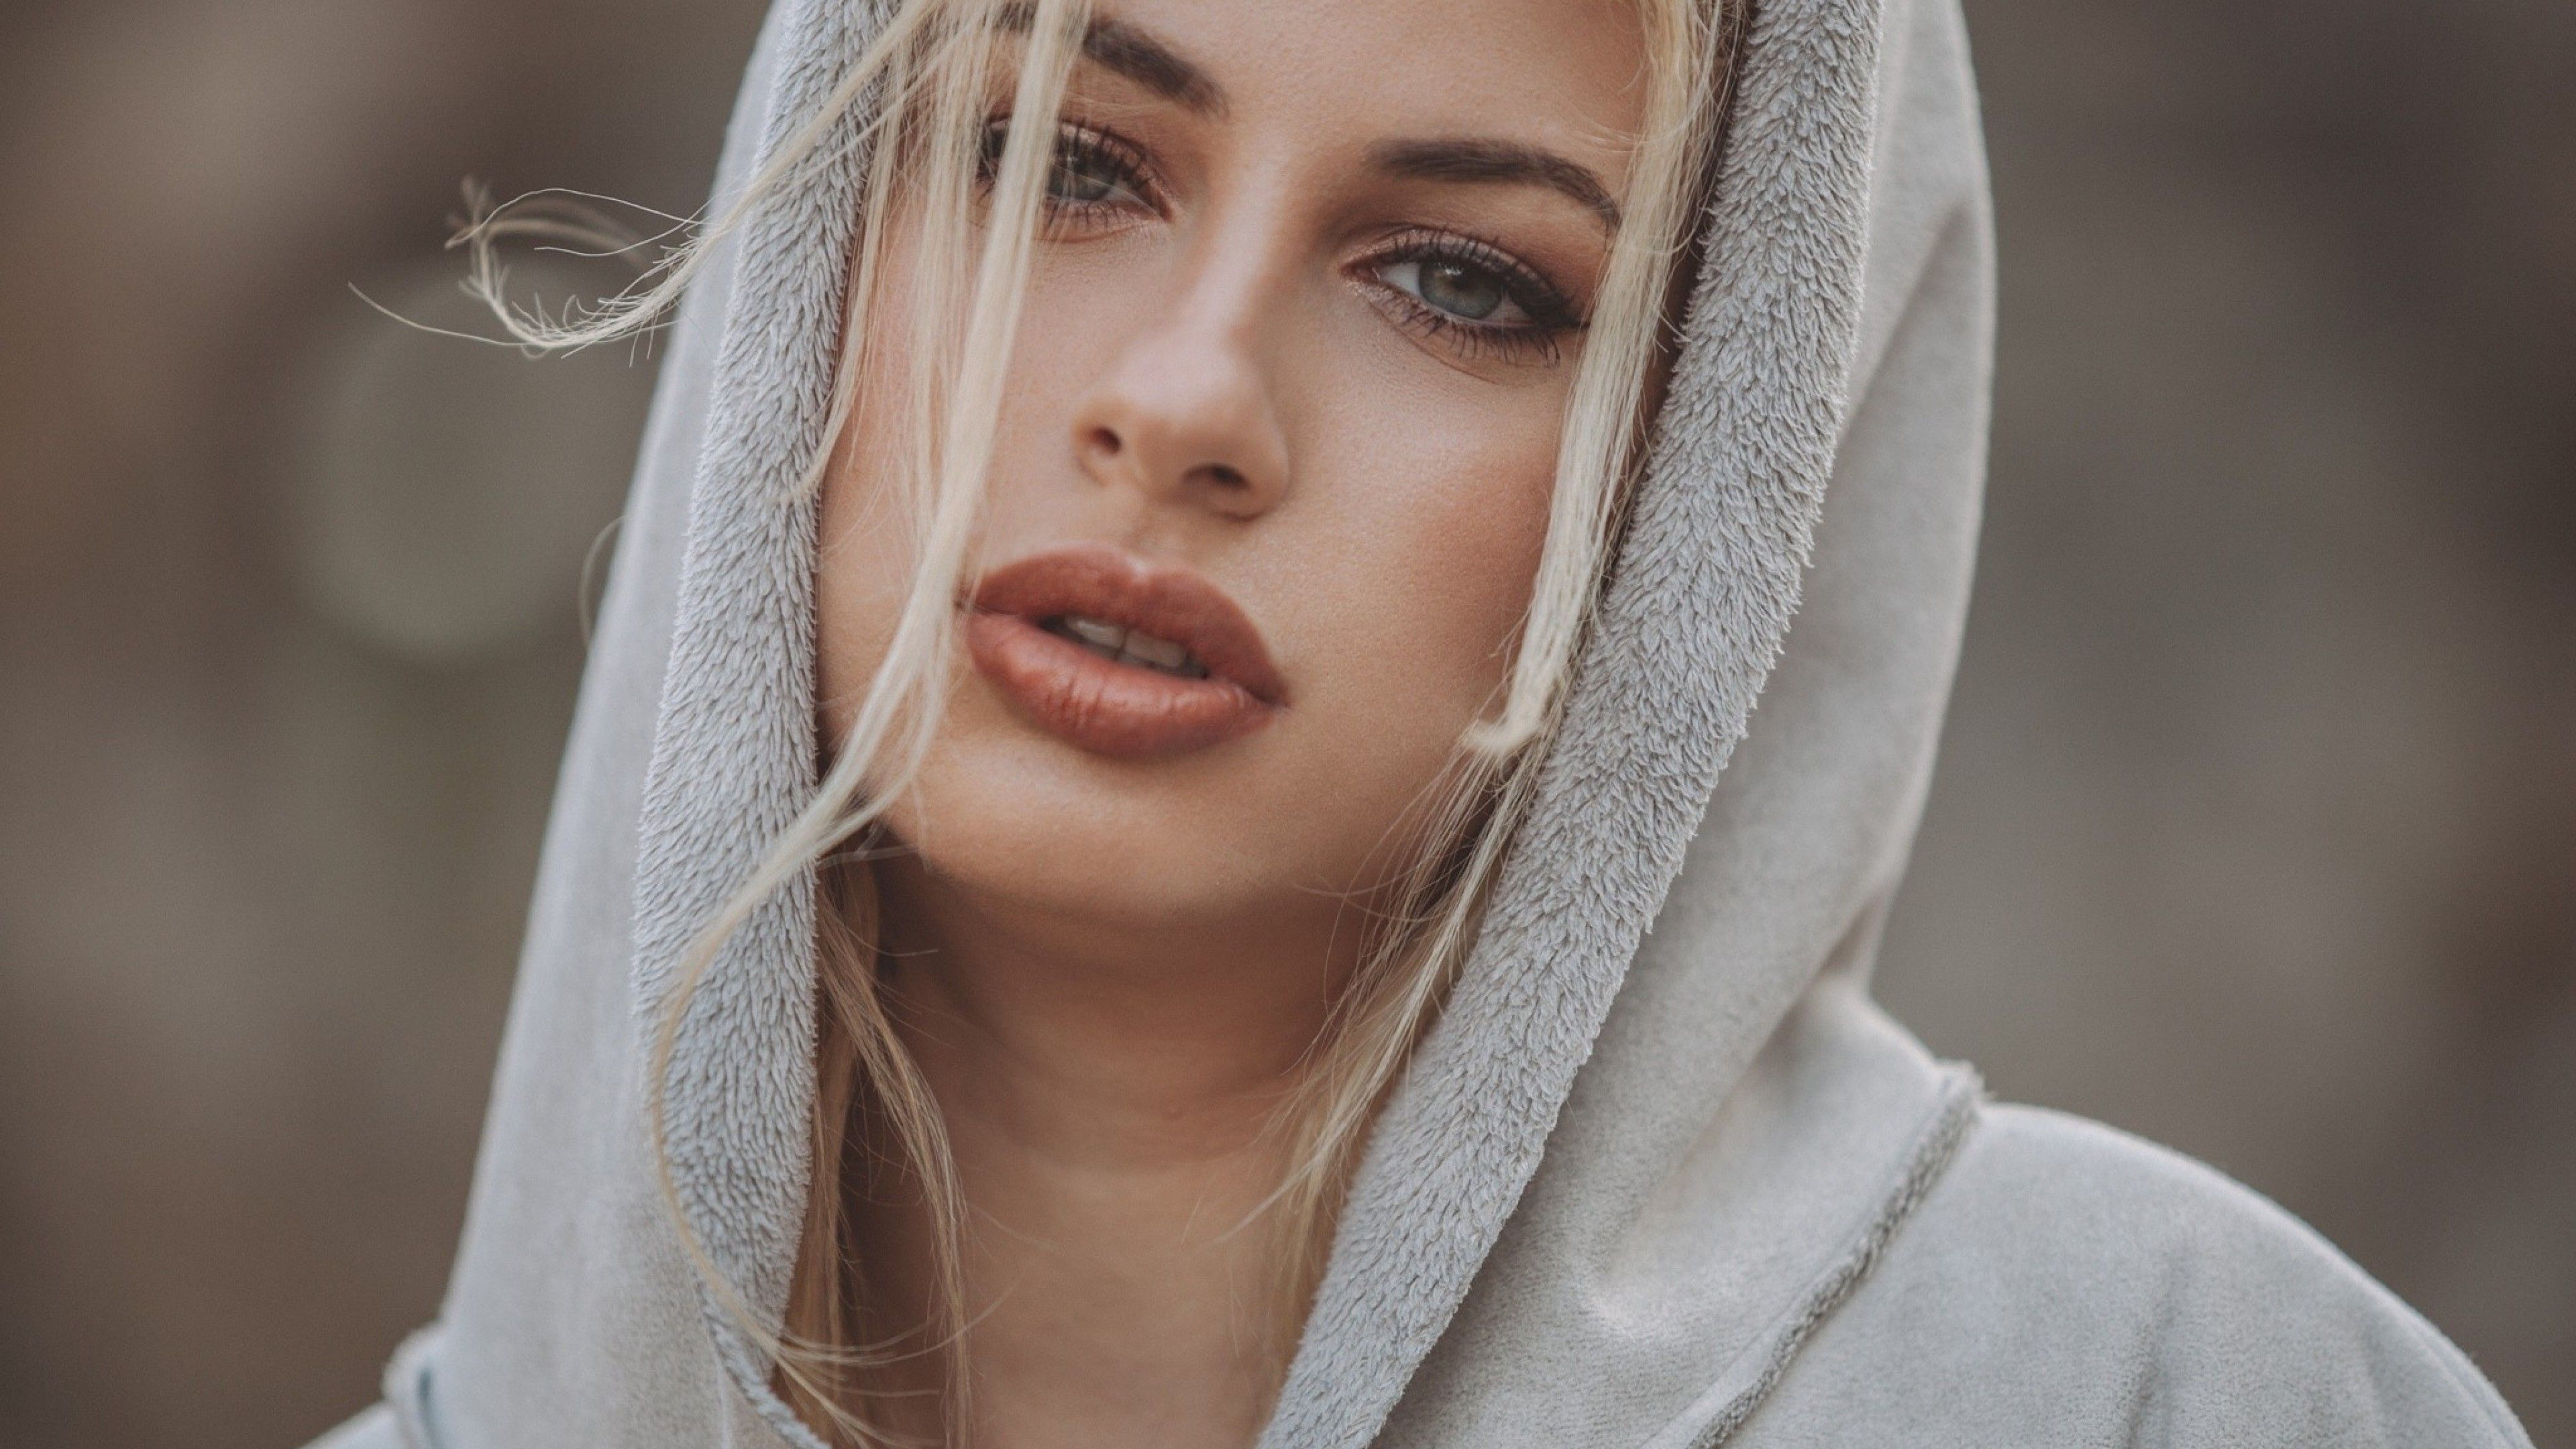 Download 3840x2160 Blonde, Women, Hoodie, Open Mouth, Face